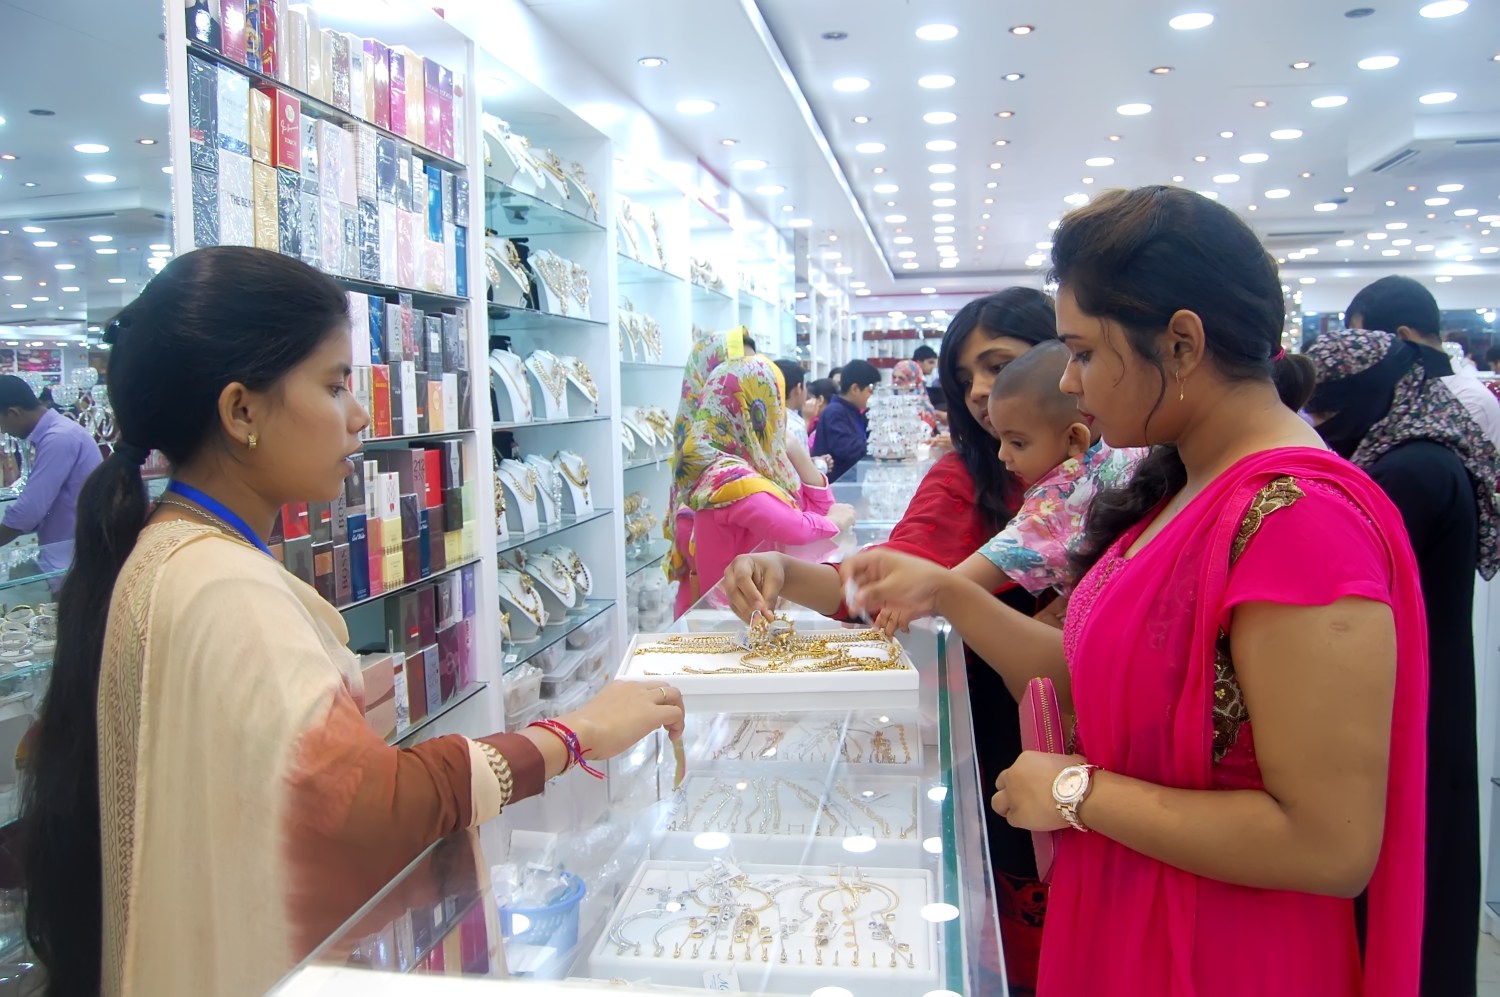 Women purchase jewelry at a shop counter in Bangladesh